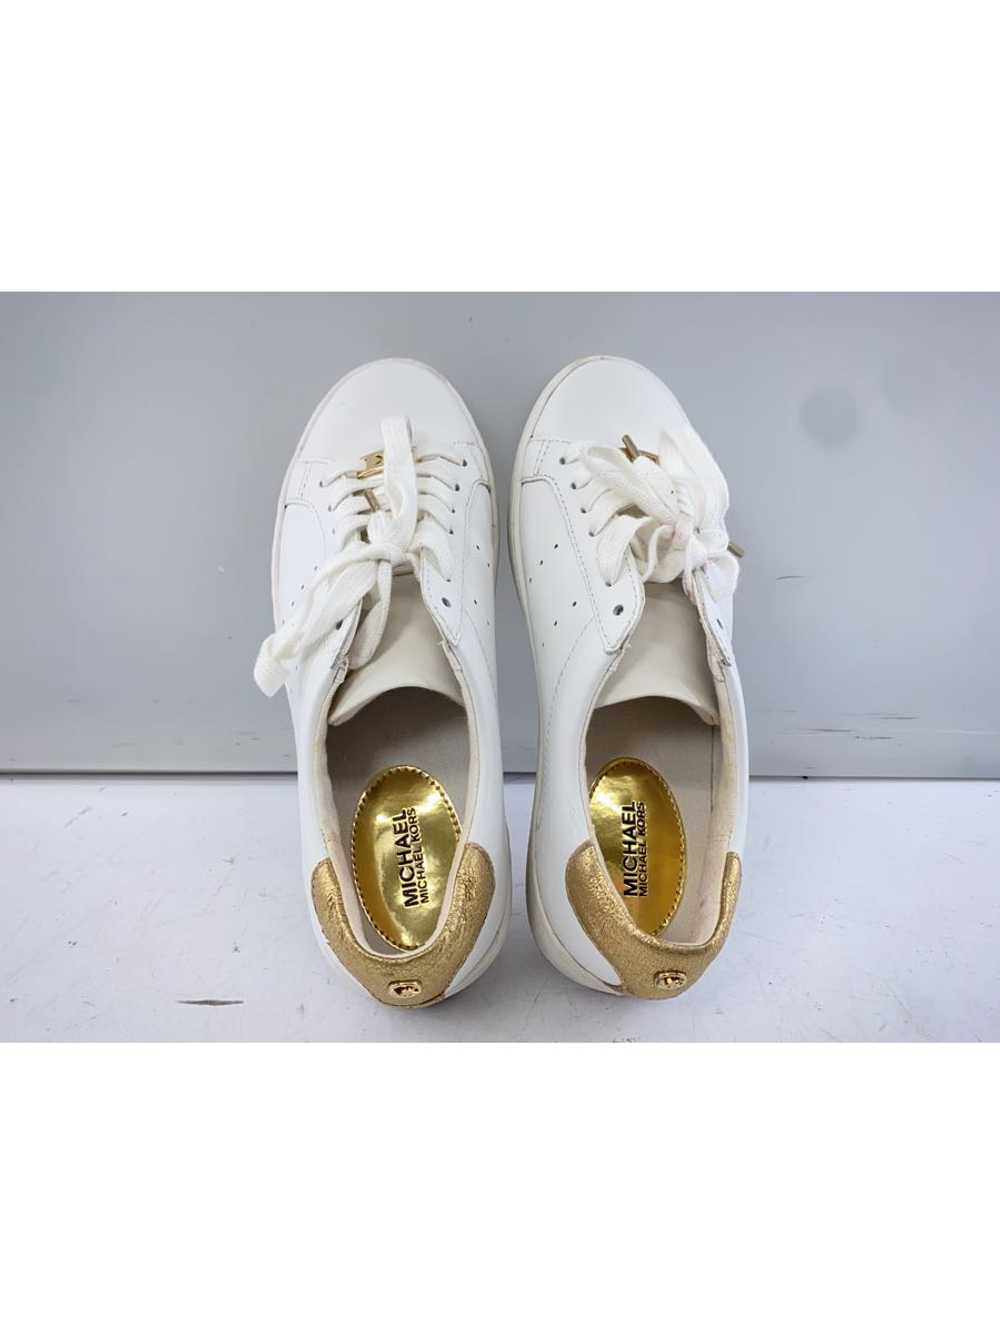 Michael Kors Low Cut Sneakers/36/White/Leather/Hx… - image 3